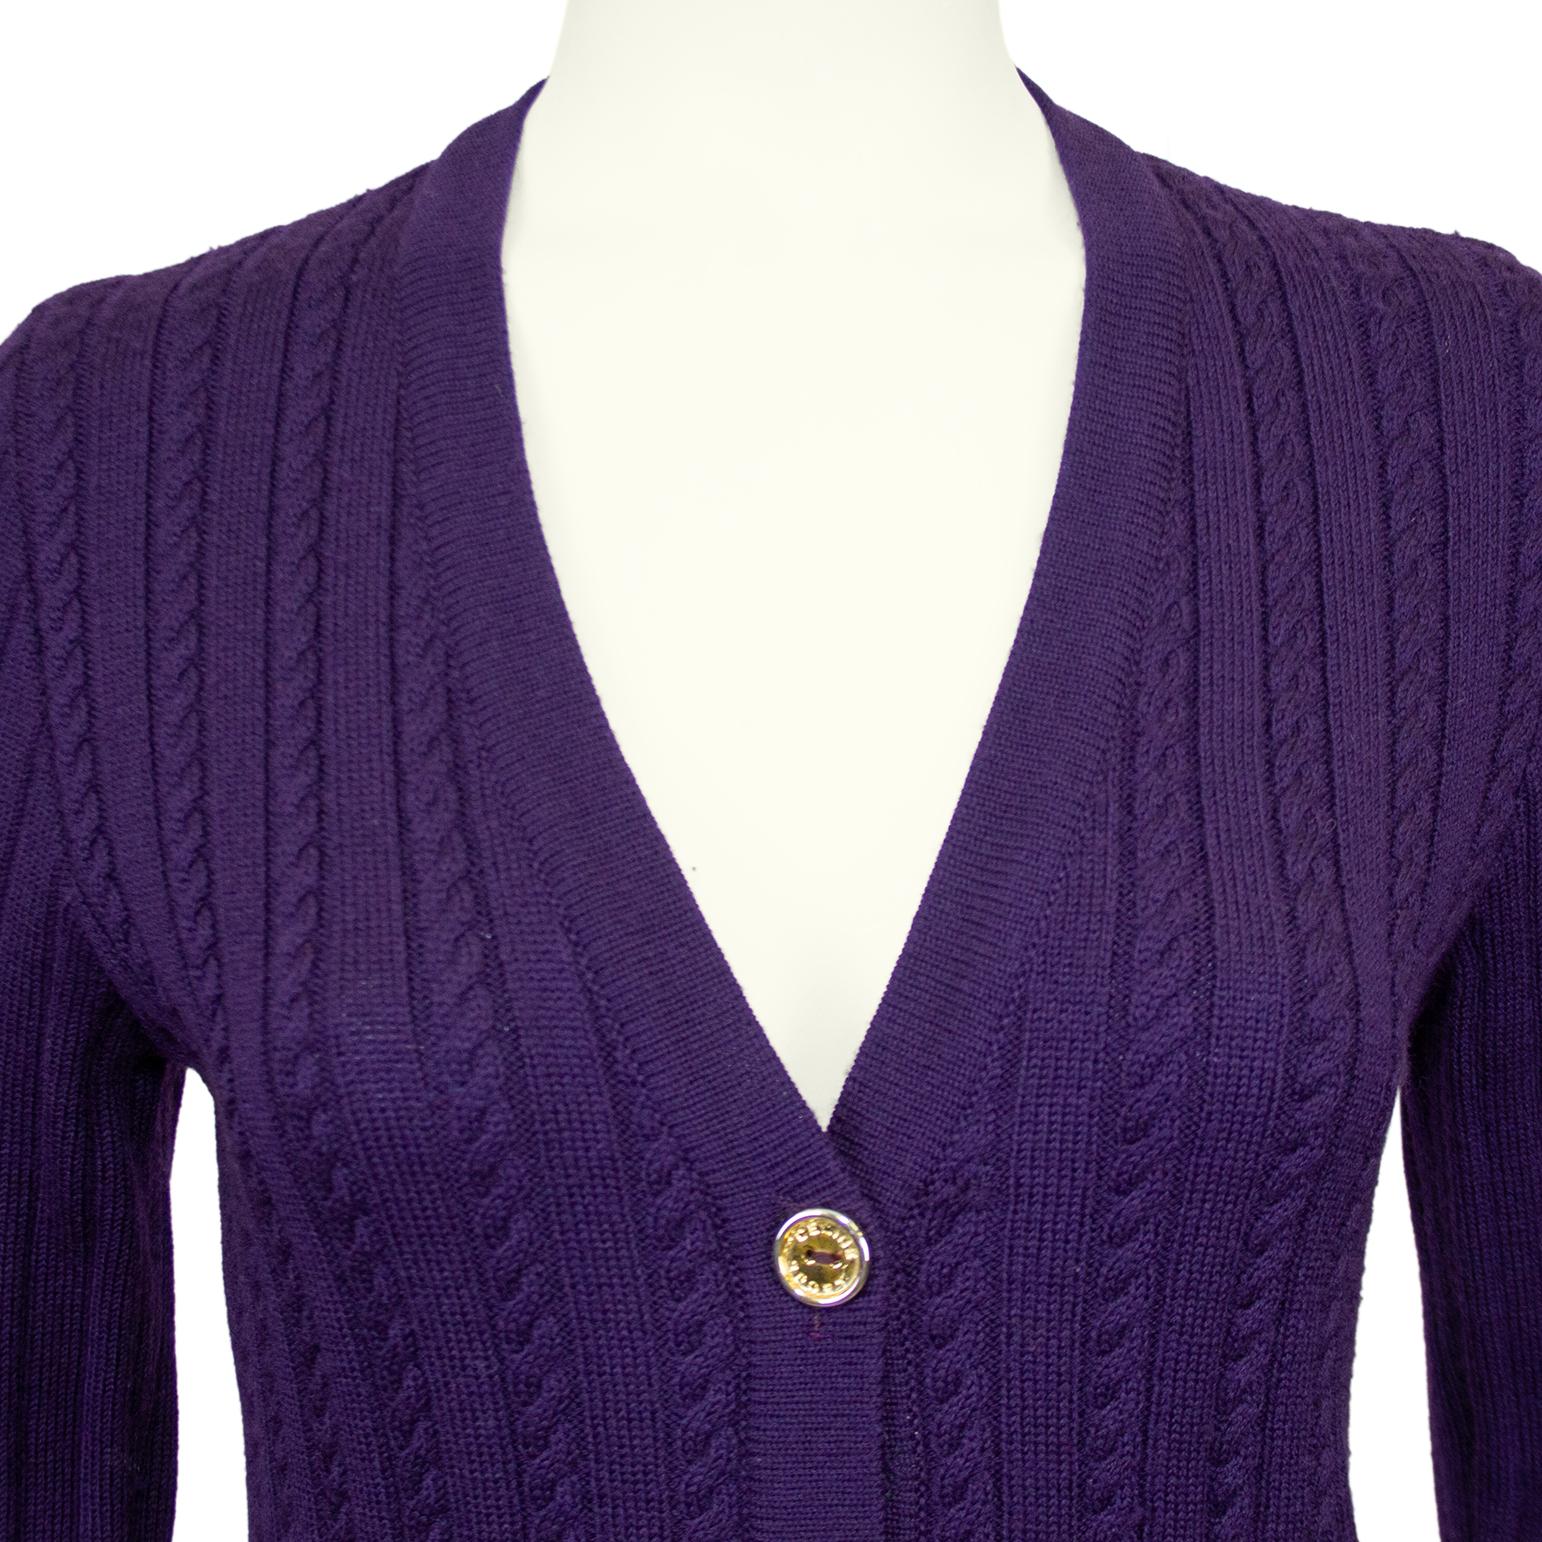 1970s Celine Purple Skirt and Sweater Ensemble For Sale 2